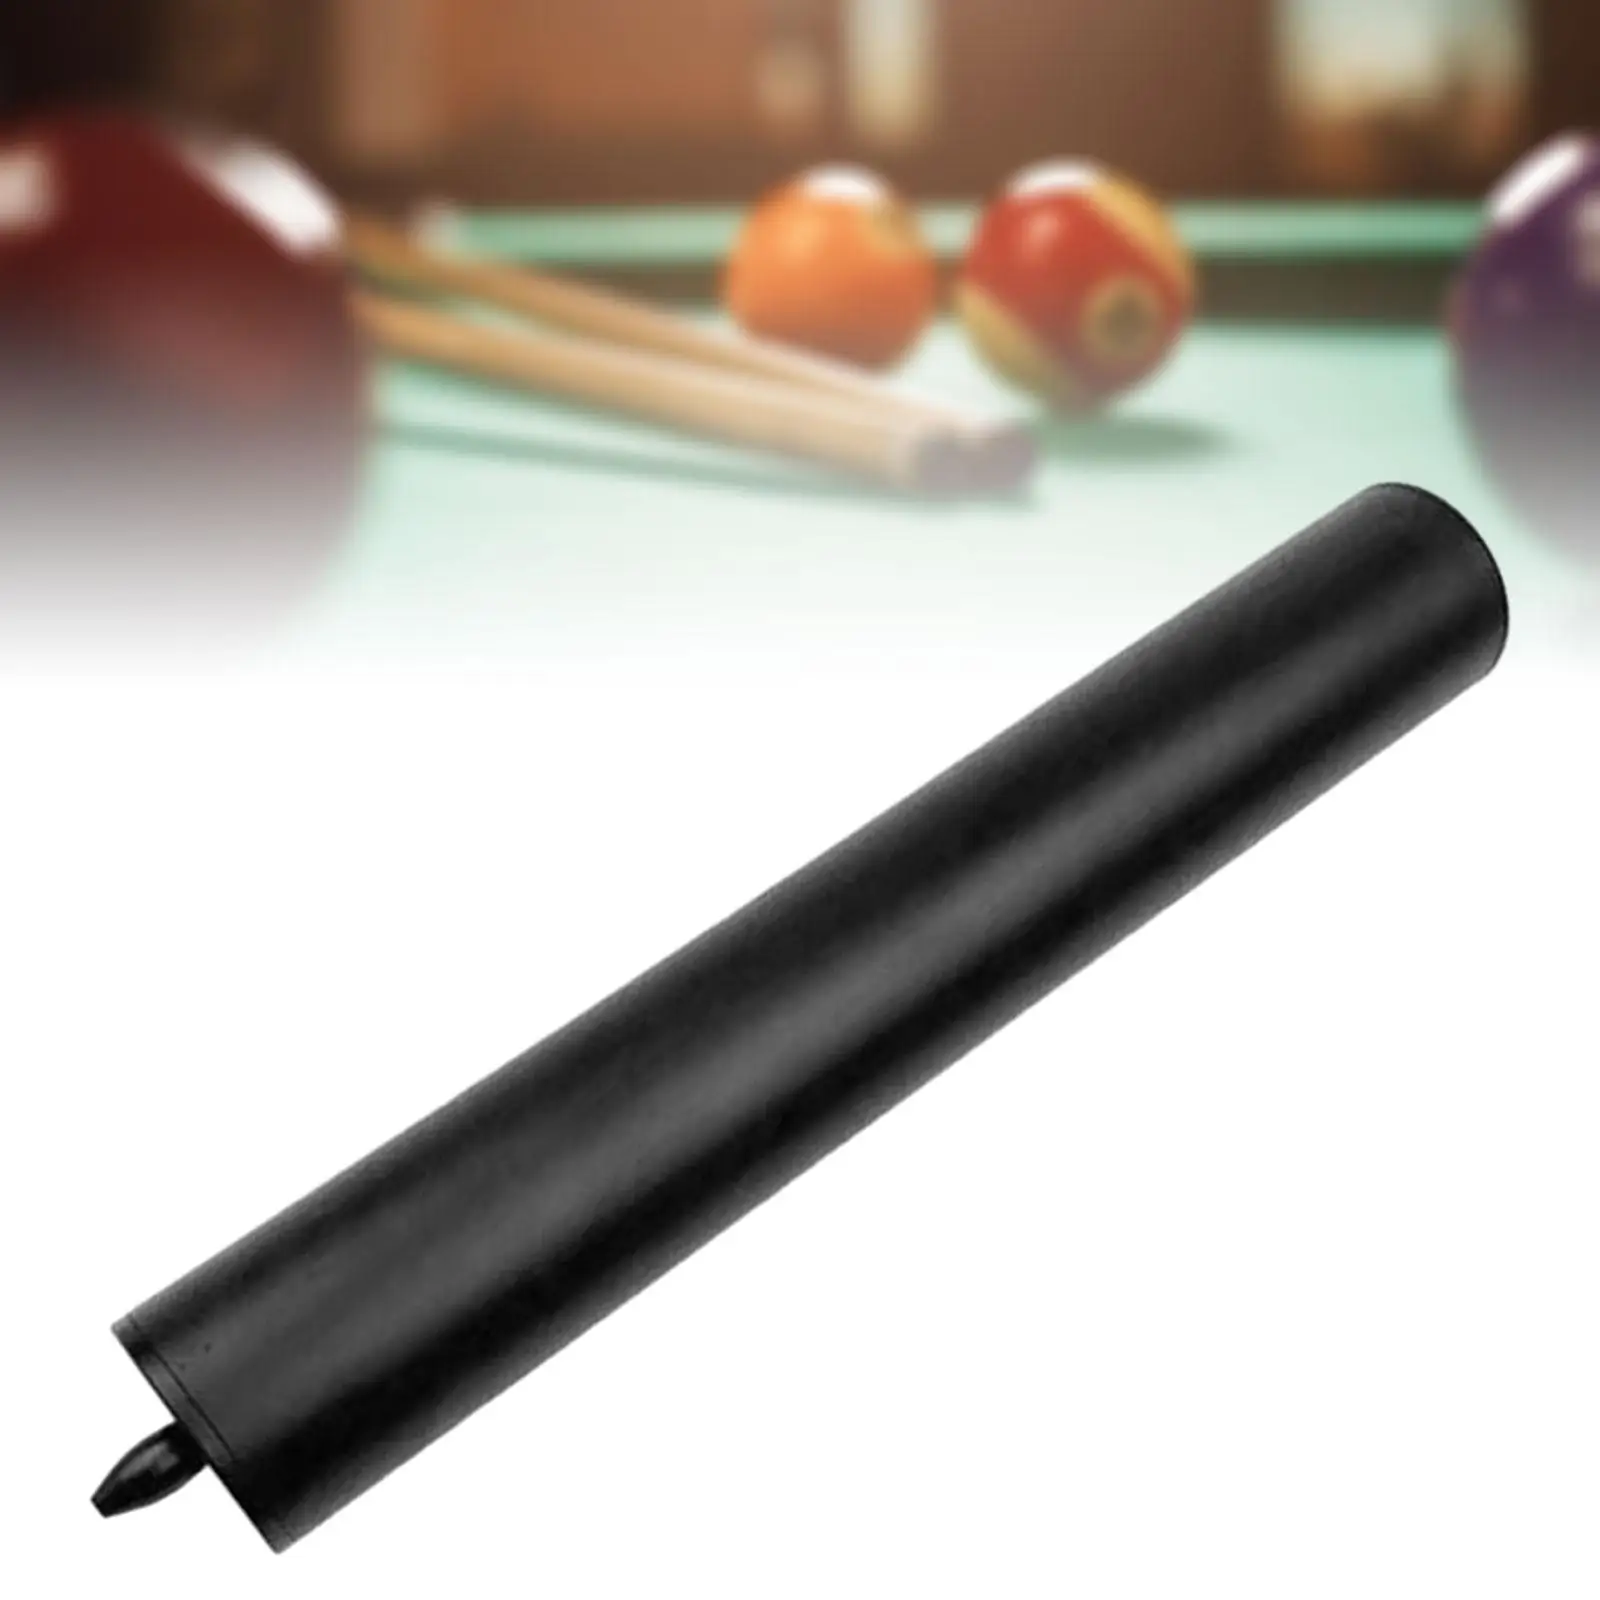 Pool Cue Extender Tool Compact Snooker Cue Extension Billiards Cue Extension for Beginners Snooker Enthusiast Athlete Accessory